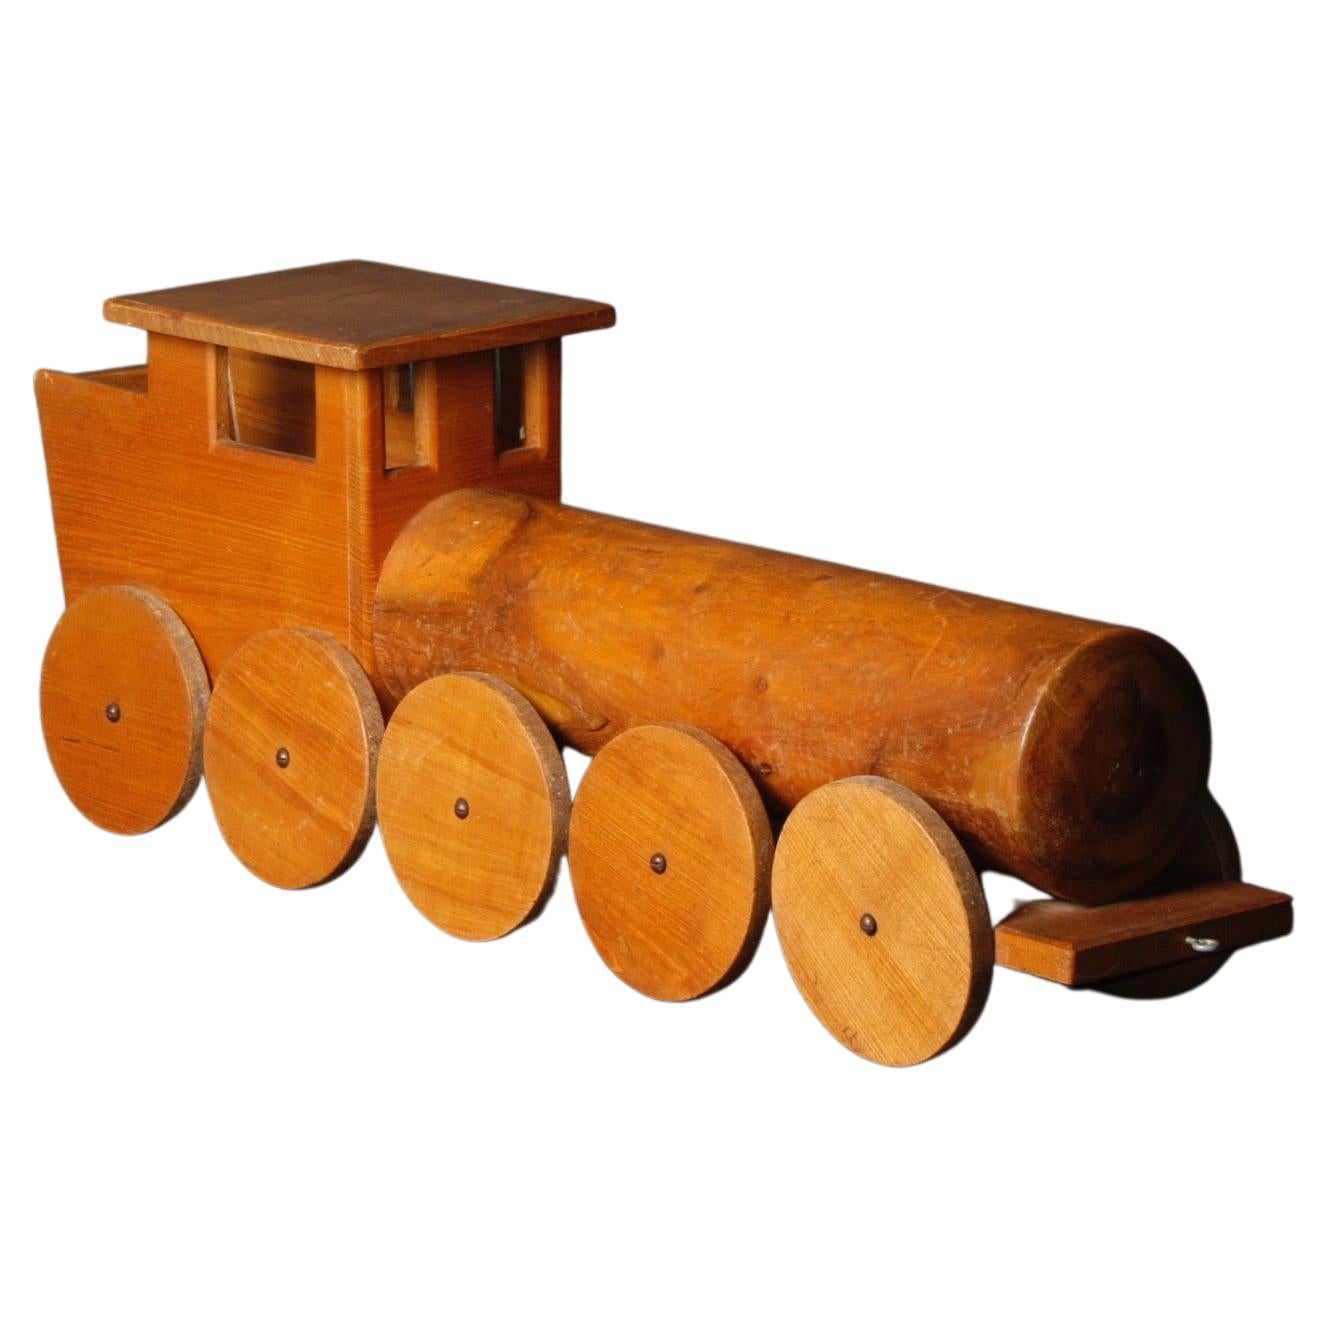 Big locomotive toy with solid wood For Sale